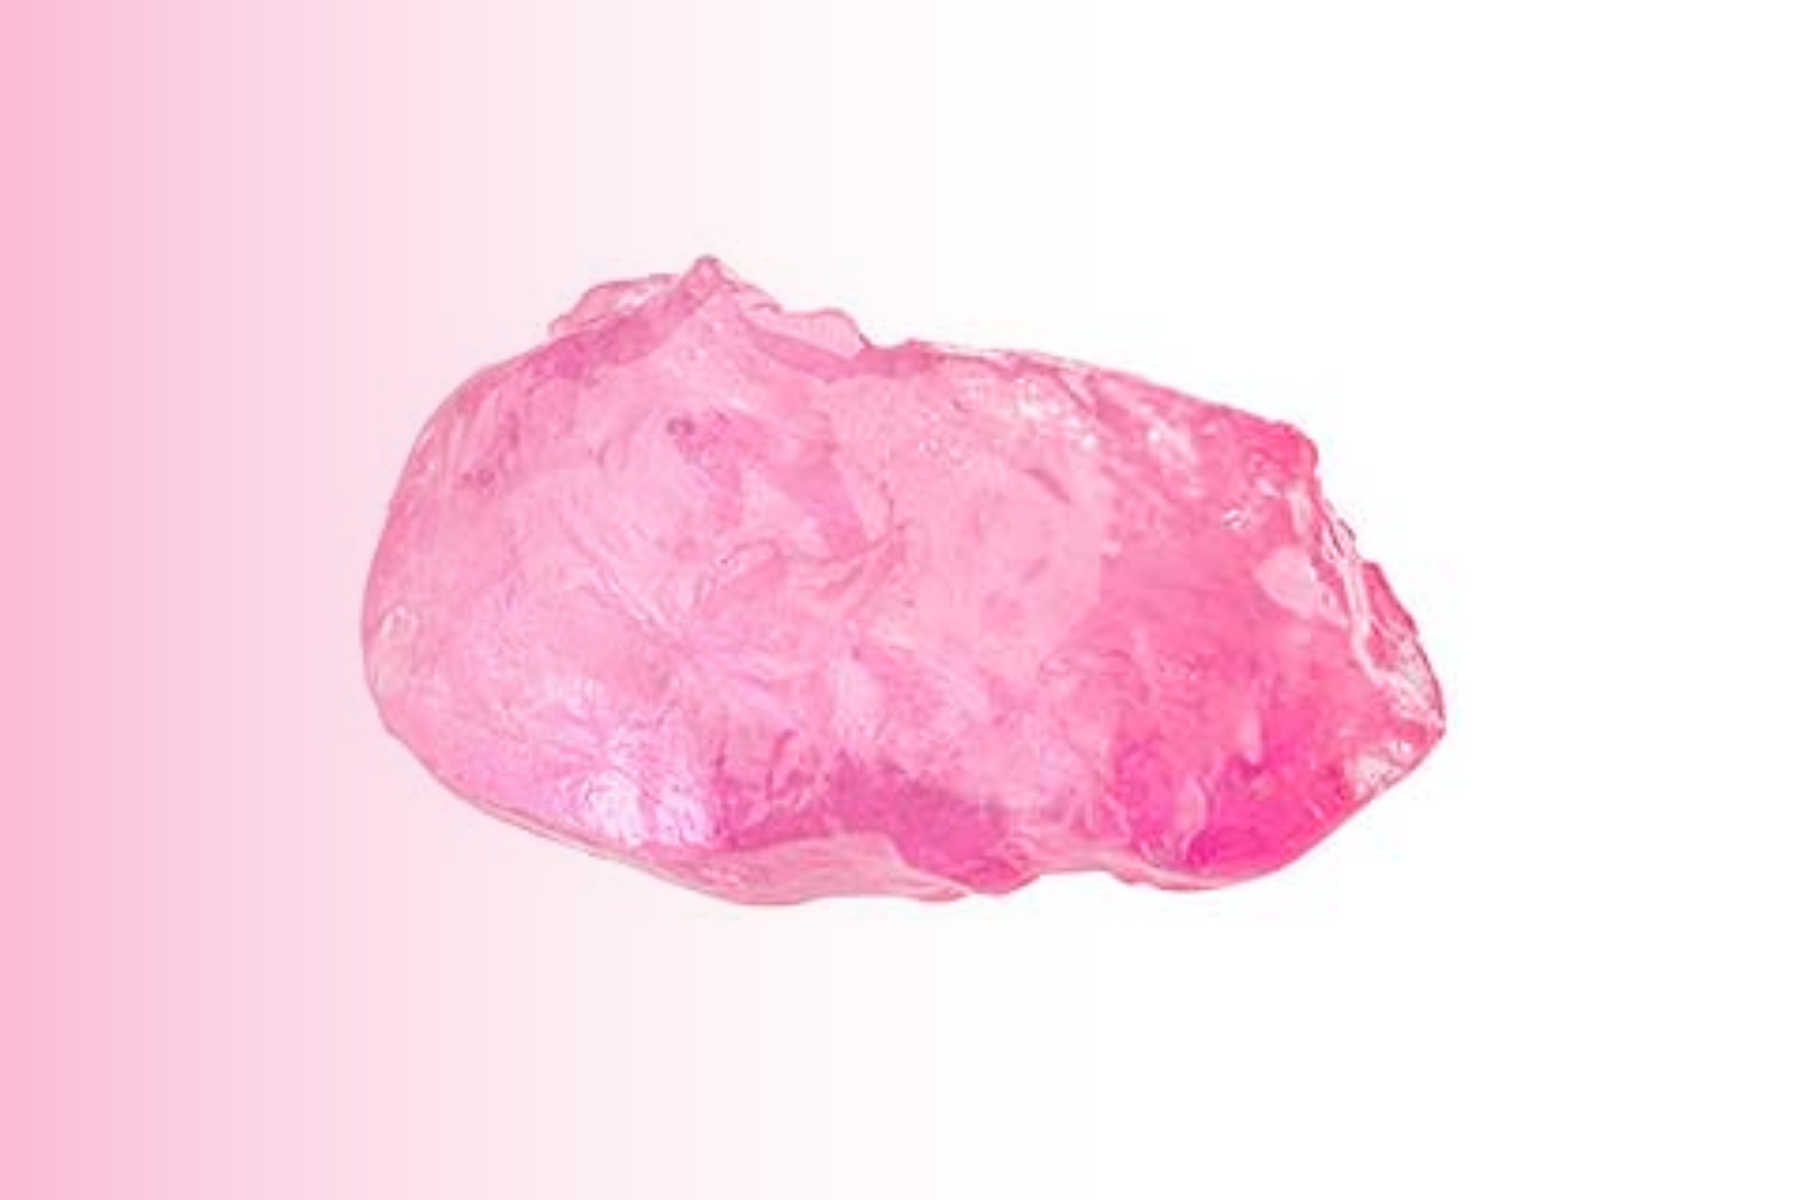 Transparent pink sapphire in rock form